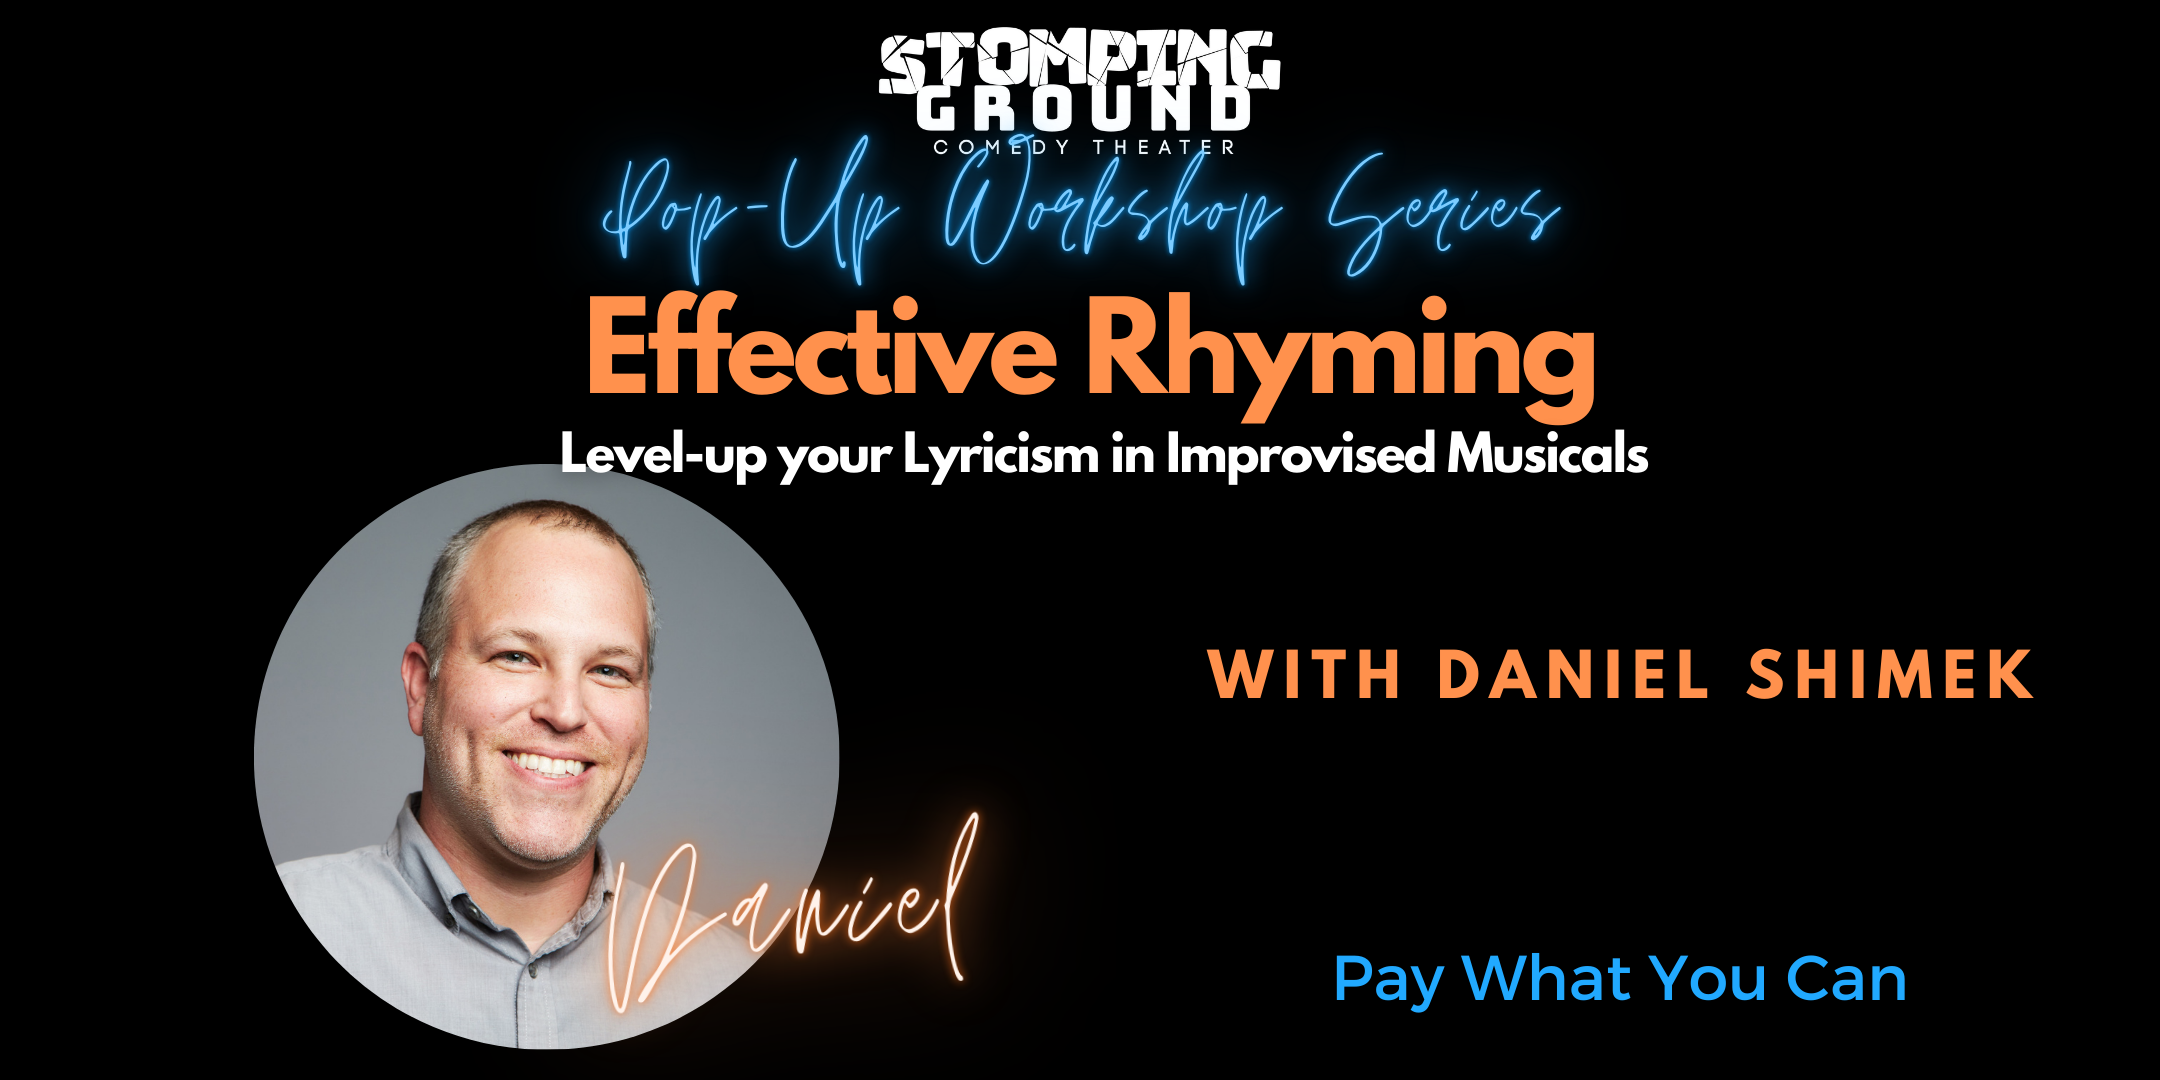 Effective Rhyming: Level-Up Your Lyricism in Improvised Musicals - Stomping  Ground Comedy Theater